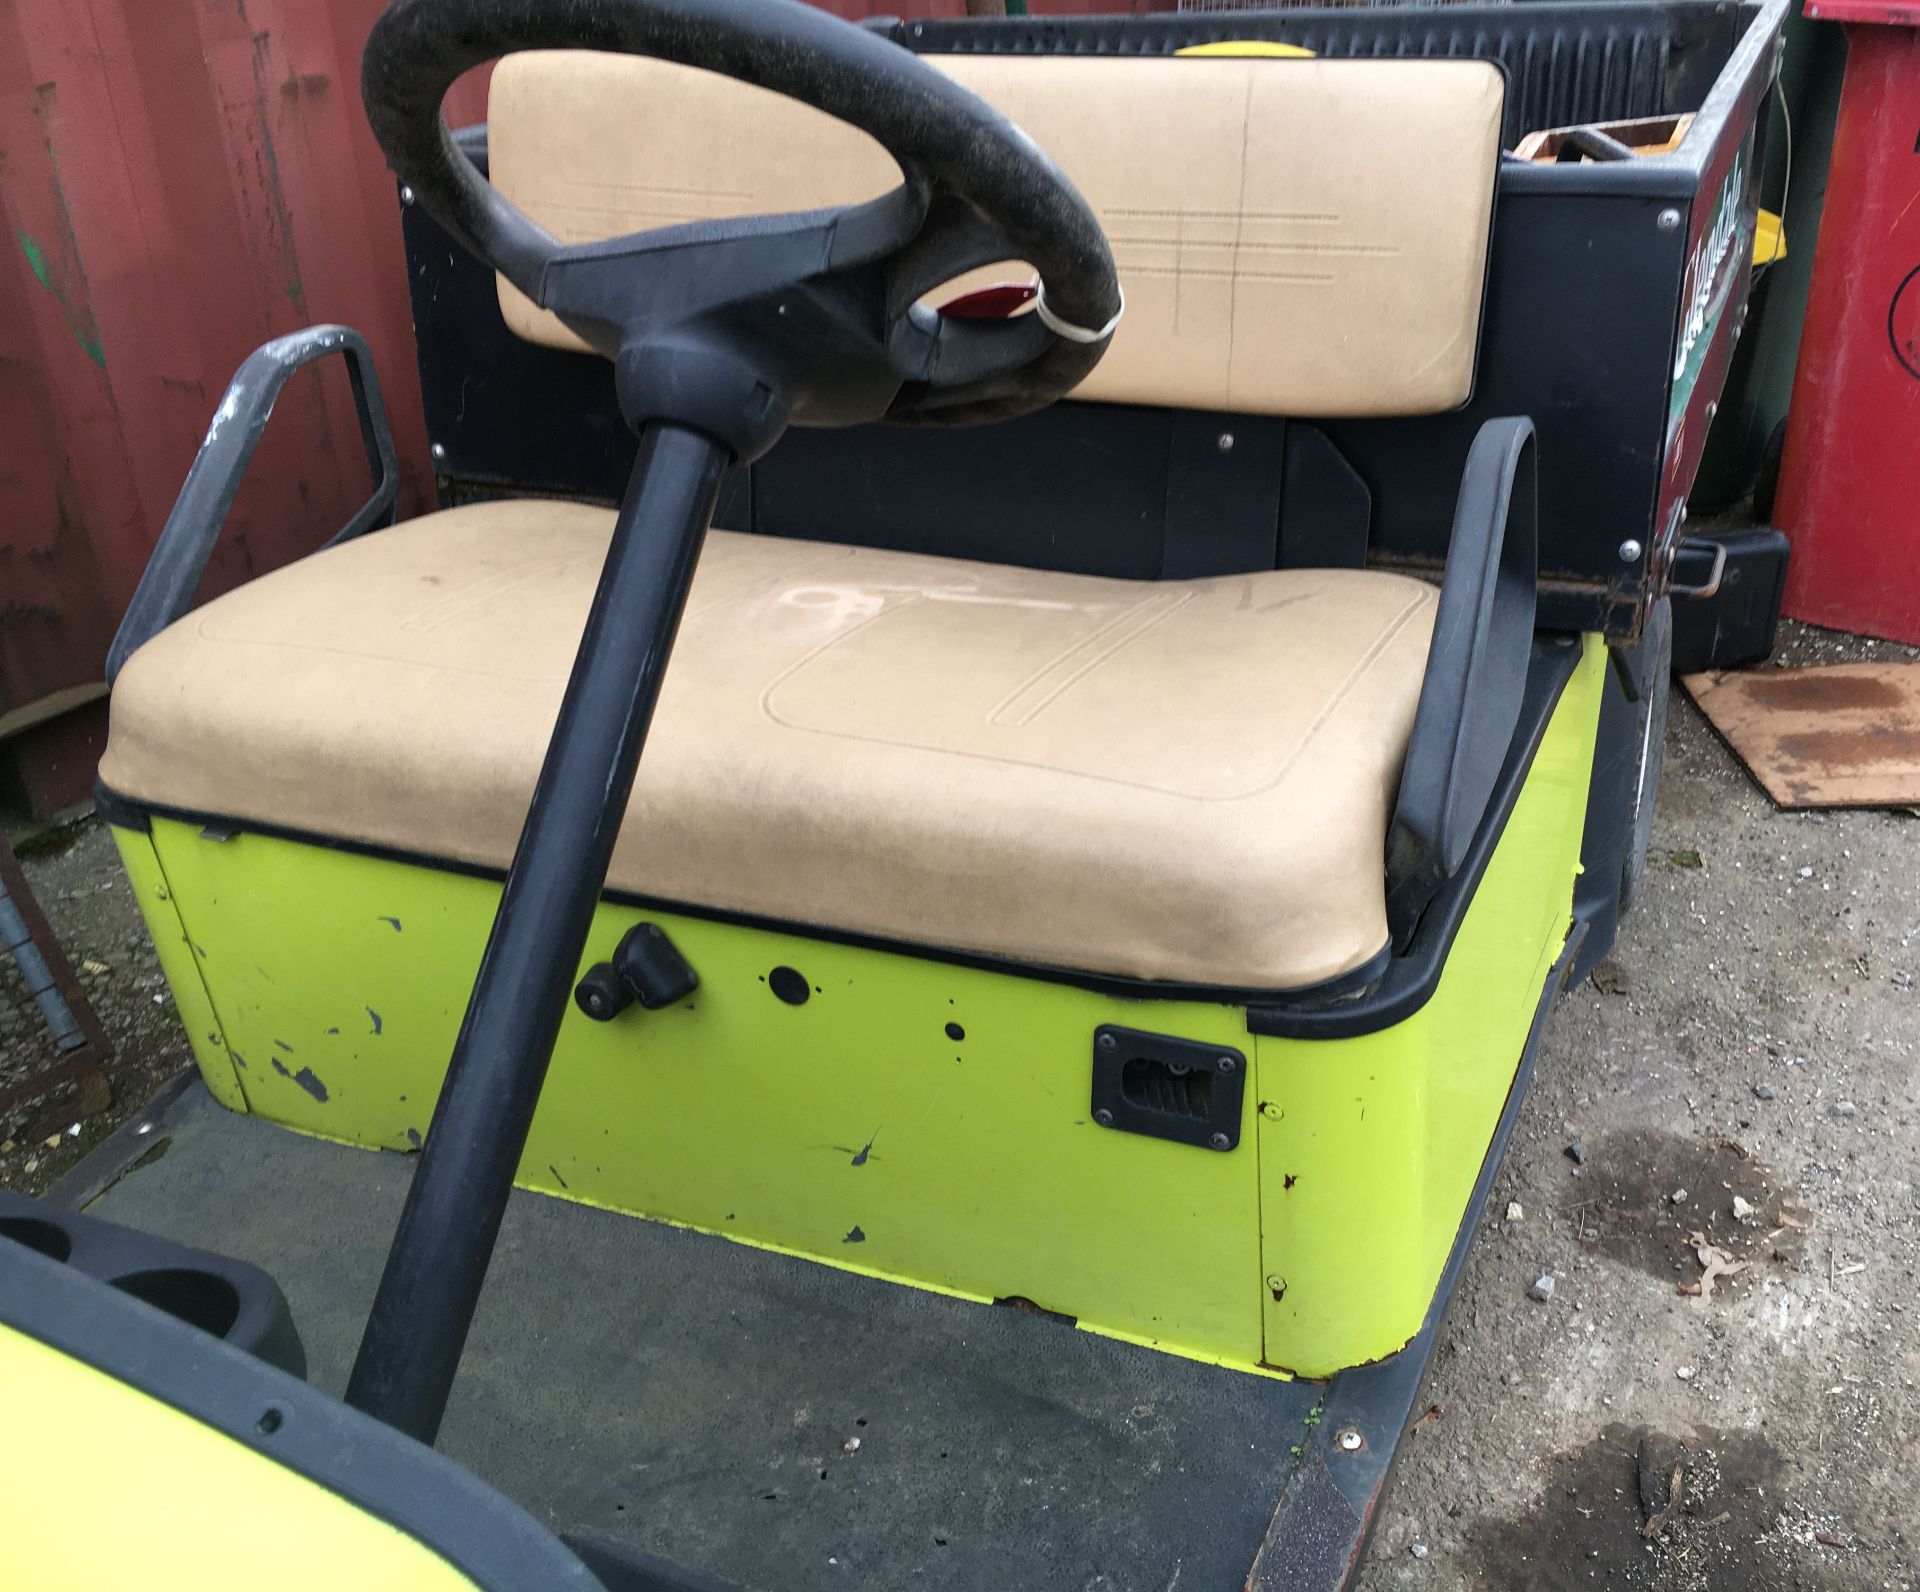 1 x Ezgo Workhorse Golf Buggy - CL548 - Location: Oadby - Image 2 of 2